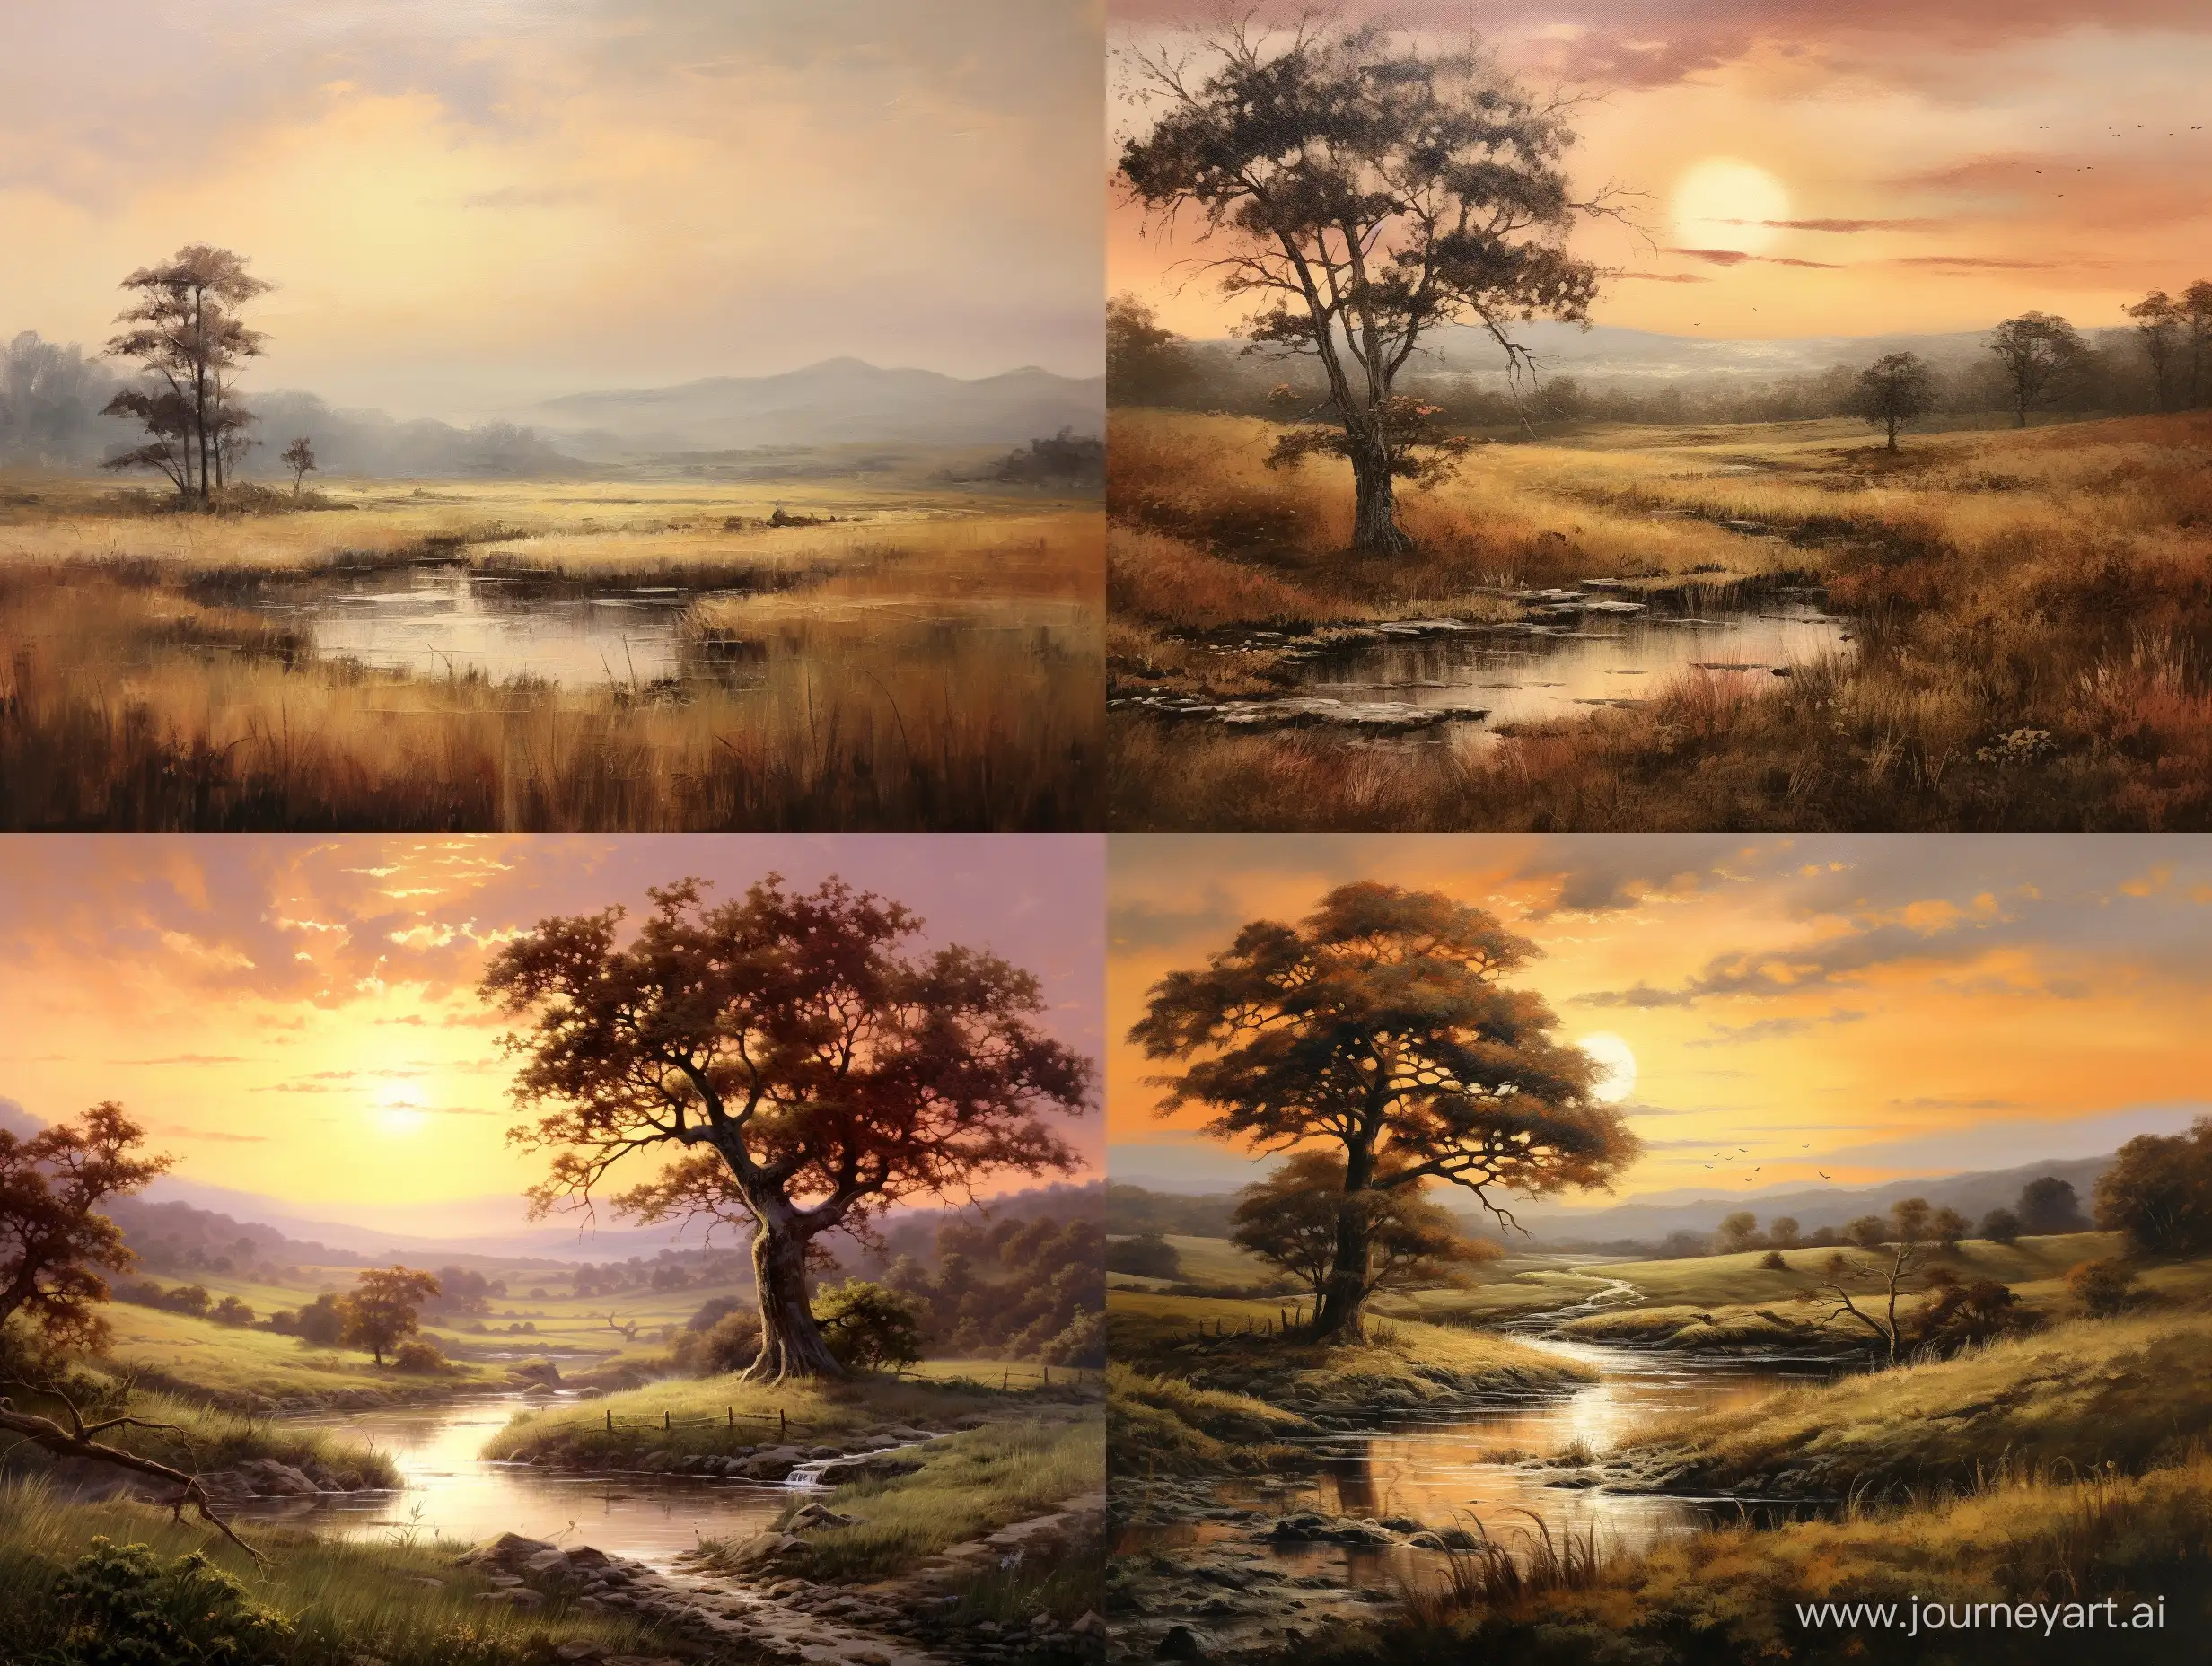 an oil painting depicting an untouched natural landscape with a vintage feel, encompassing a palette of gray, gold, and brown tones, the scene highlighting the rustic beauty of rolling hills dotted with ancient trees, a tranquil brook winding through a meadow, the sky painted with the soft light of a setting sun casting long shadows and adding a golden sheen to the grass, an atmosphere of serene beauty and timeless elegance 